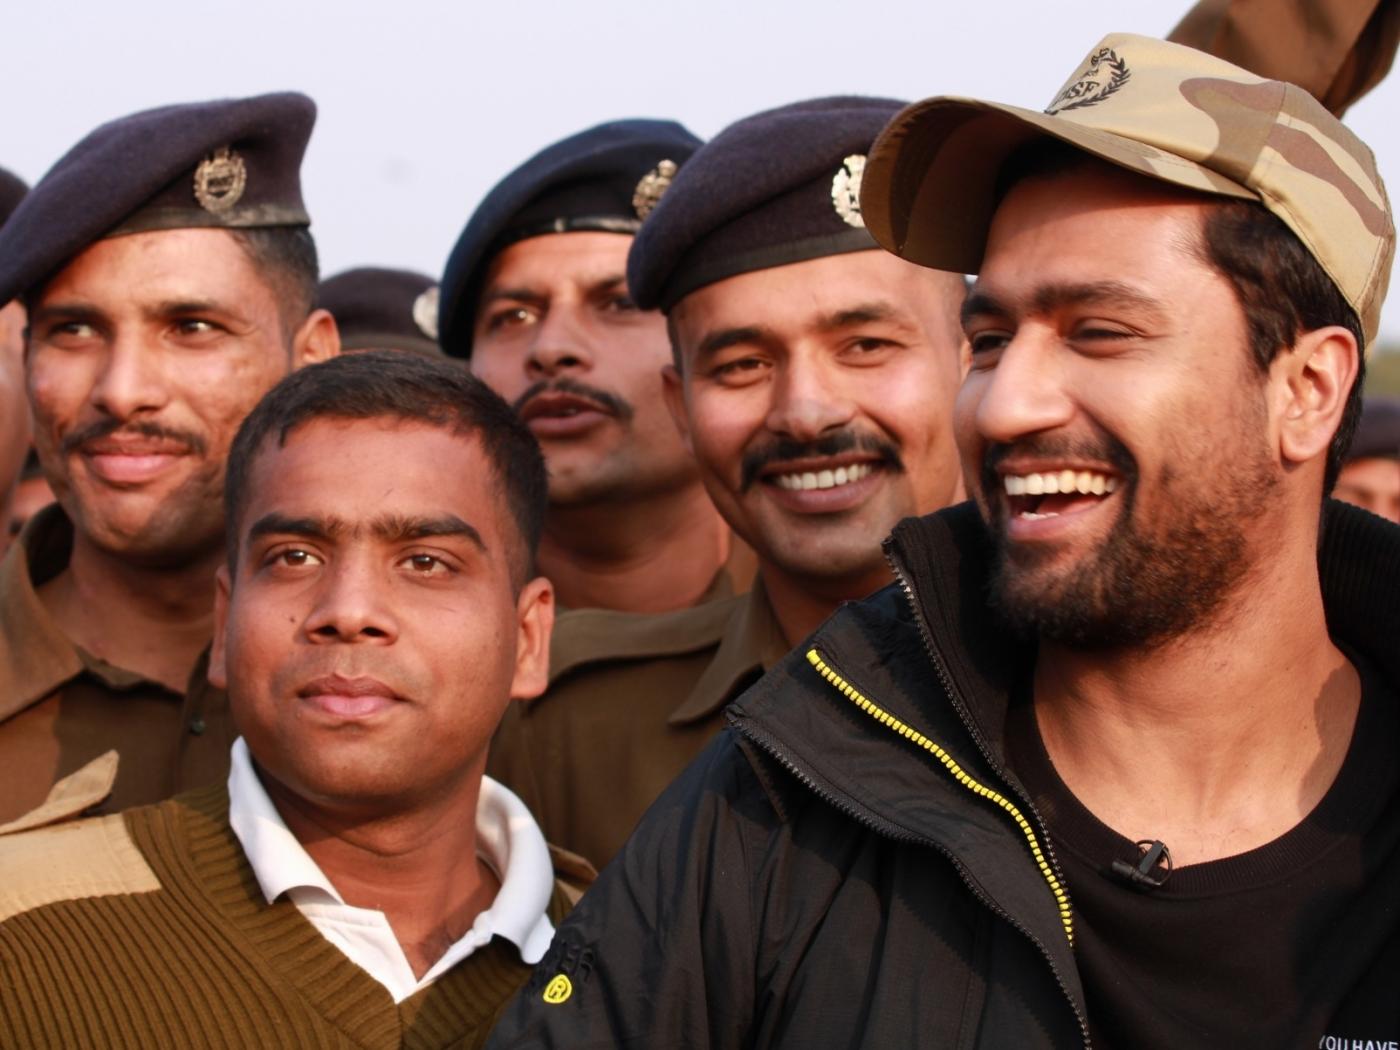 Ghaziabad: Actor Vicky Kaushal with CISF personnel during the promotions of his upcoming film "Uri: The Surgical Strike" at Indirapuram CISF Camp in Ghaziabad on Jan 5, 2019. (Photo: Amlan Paliwal/IANS) by .